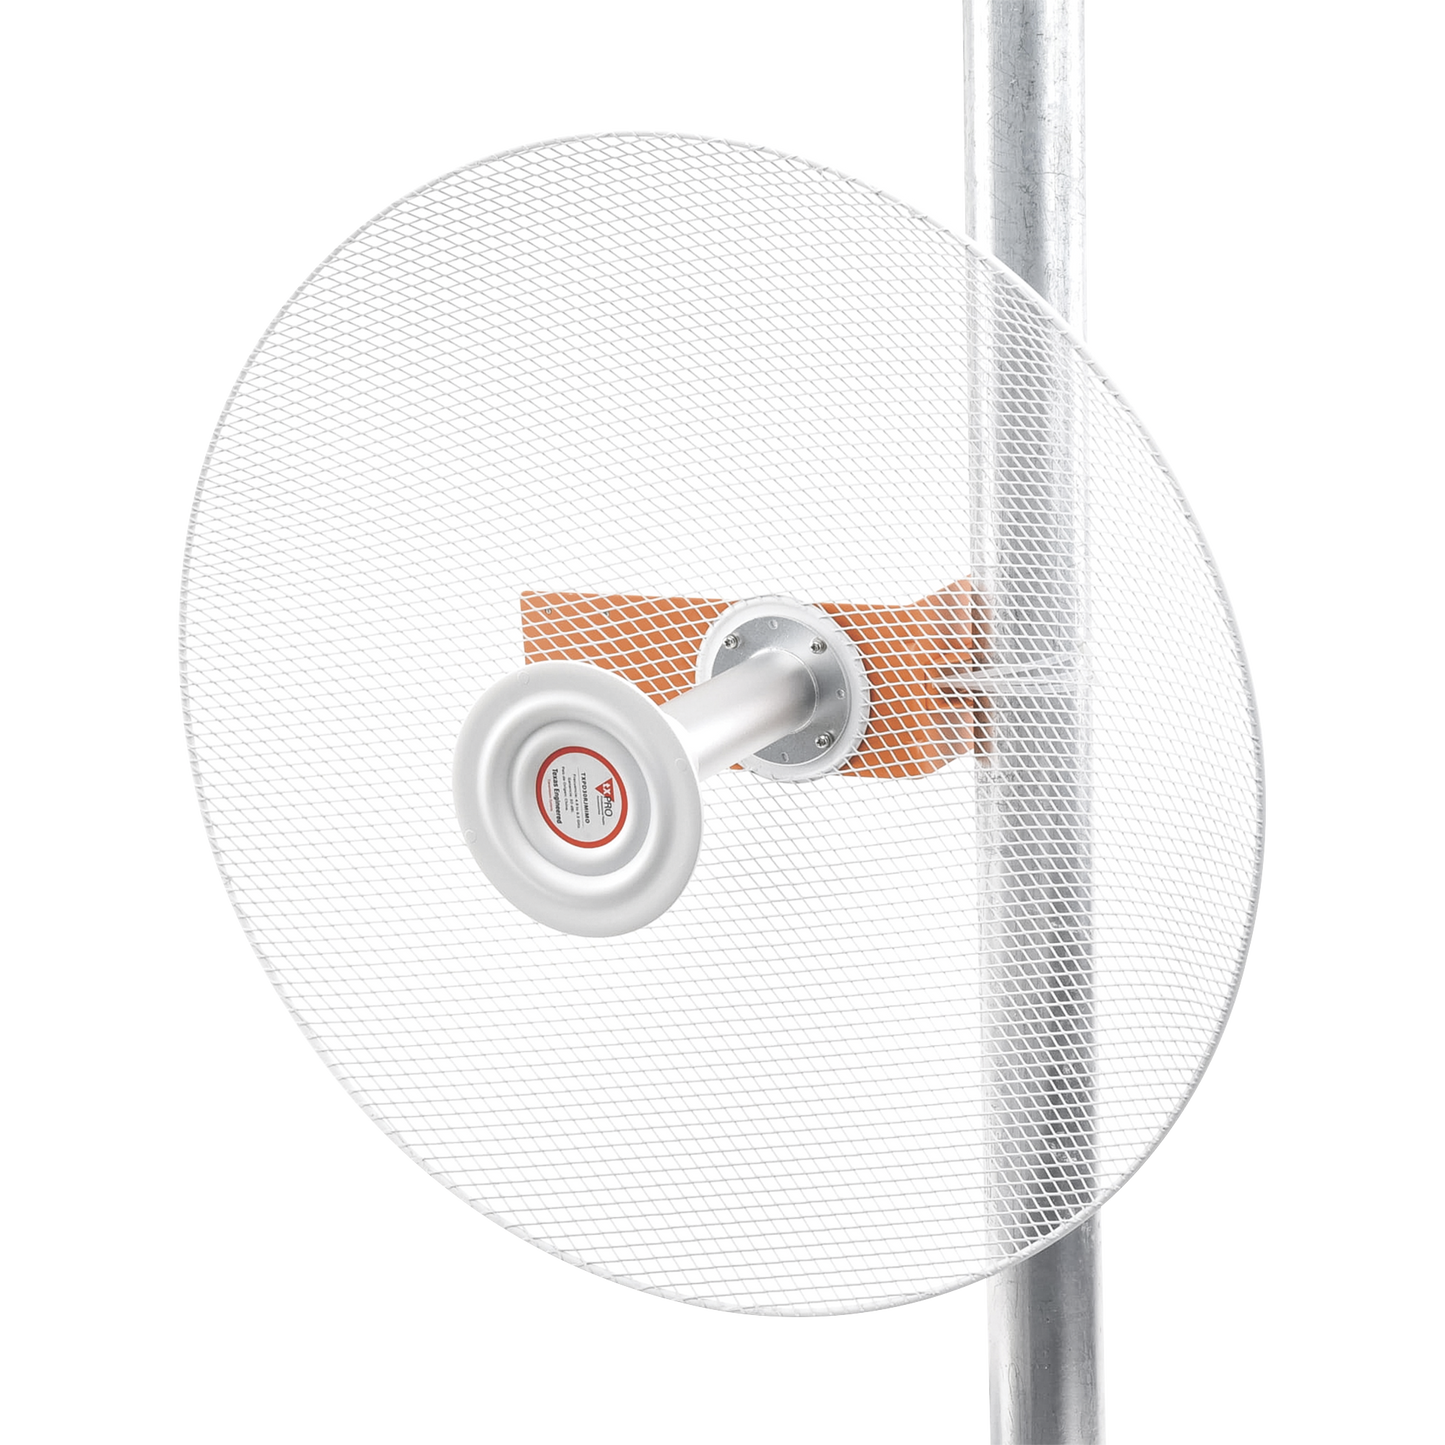 Directional antenna with high wind resistance, 34 dBi gain, frequency (4.9 - 6.5 GHz), N-female connectors, Dual polarization, includes mounting for tower or mast